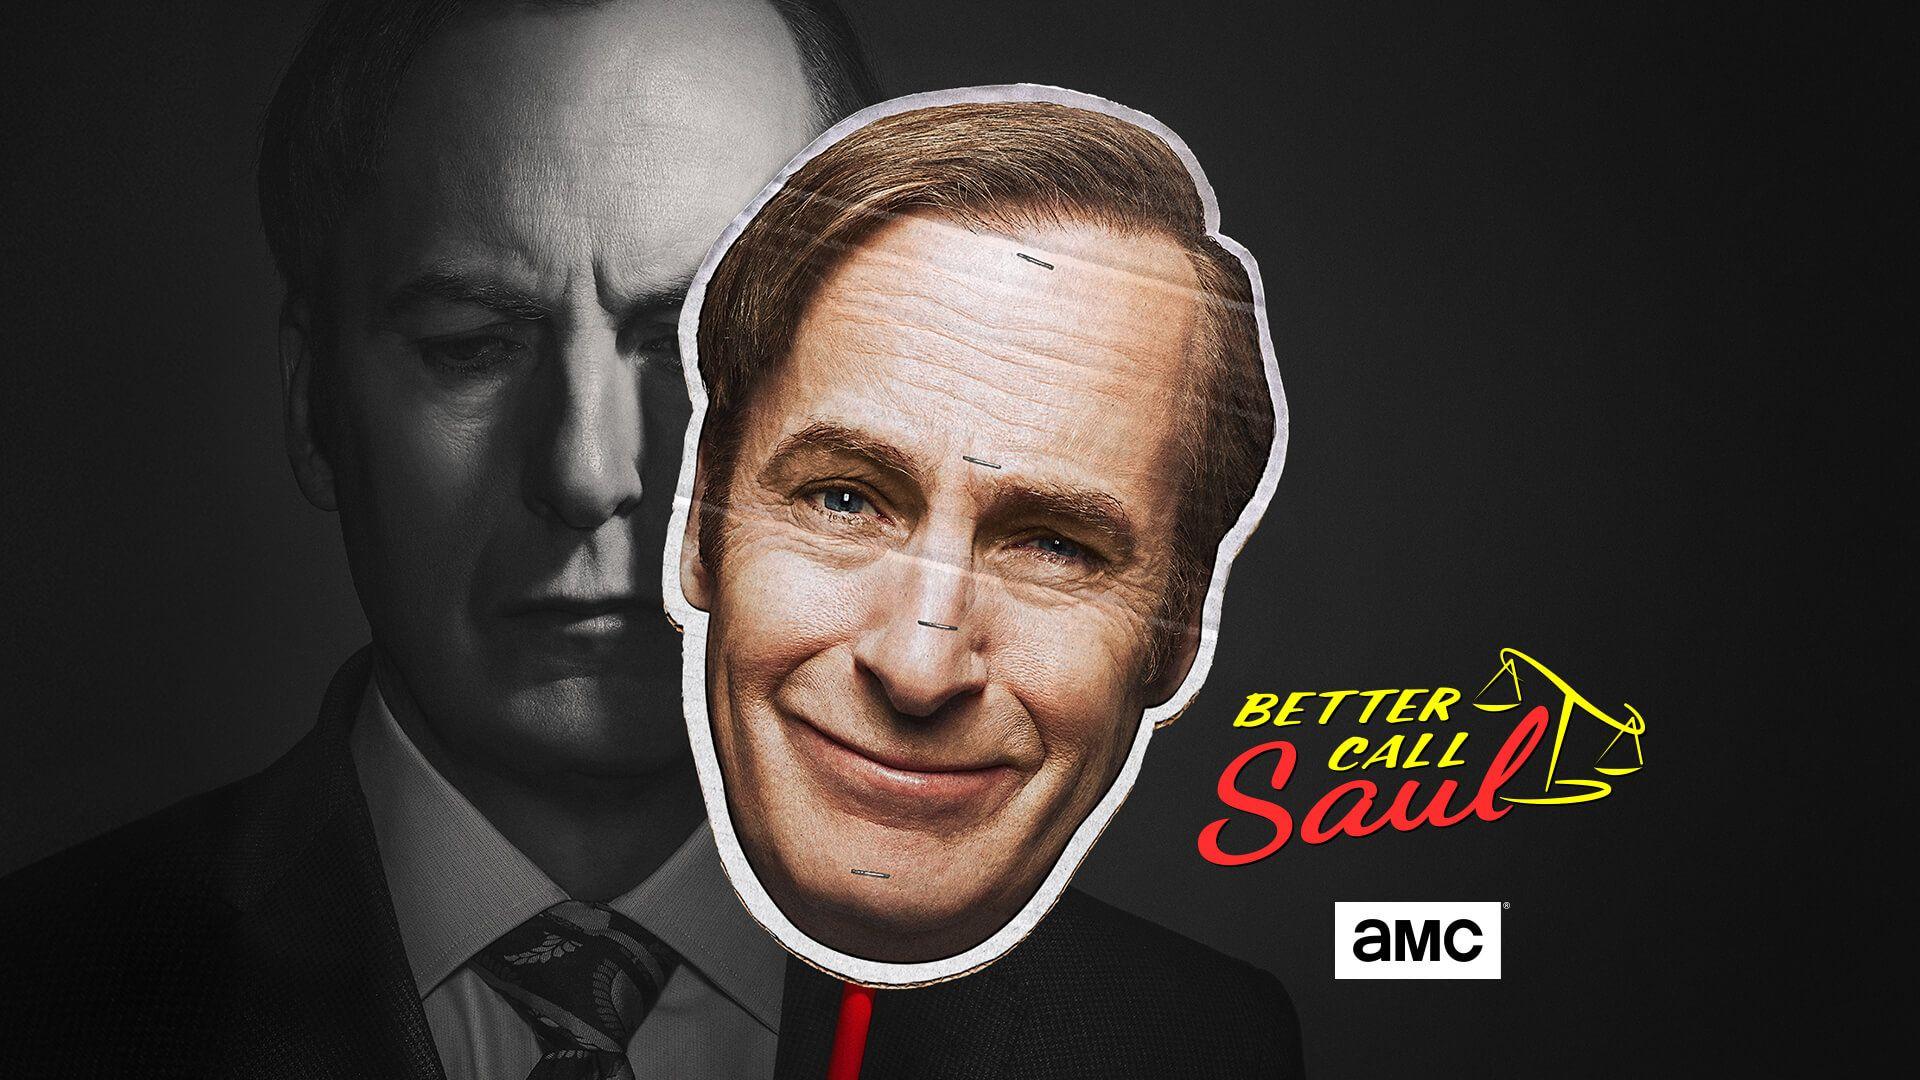 Better Call Saul Phone Wallpaper  Mobile Abyss